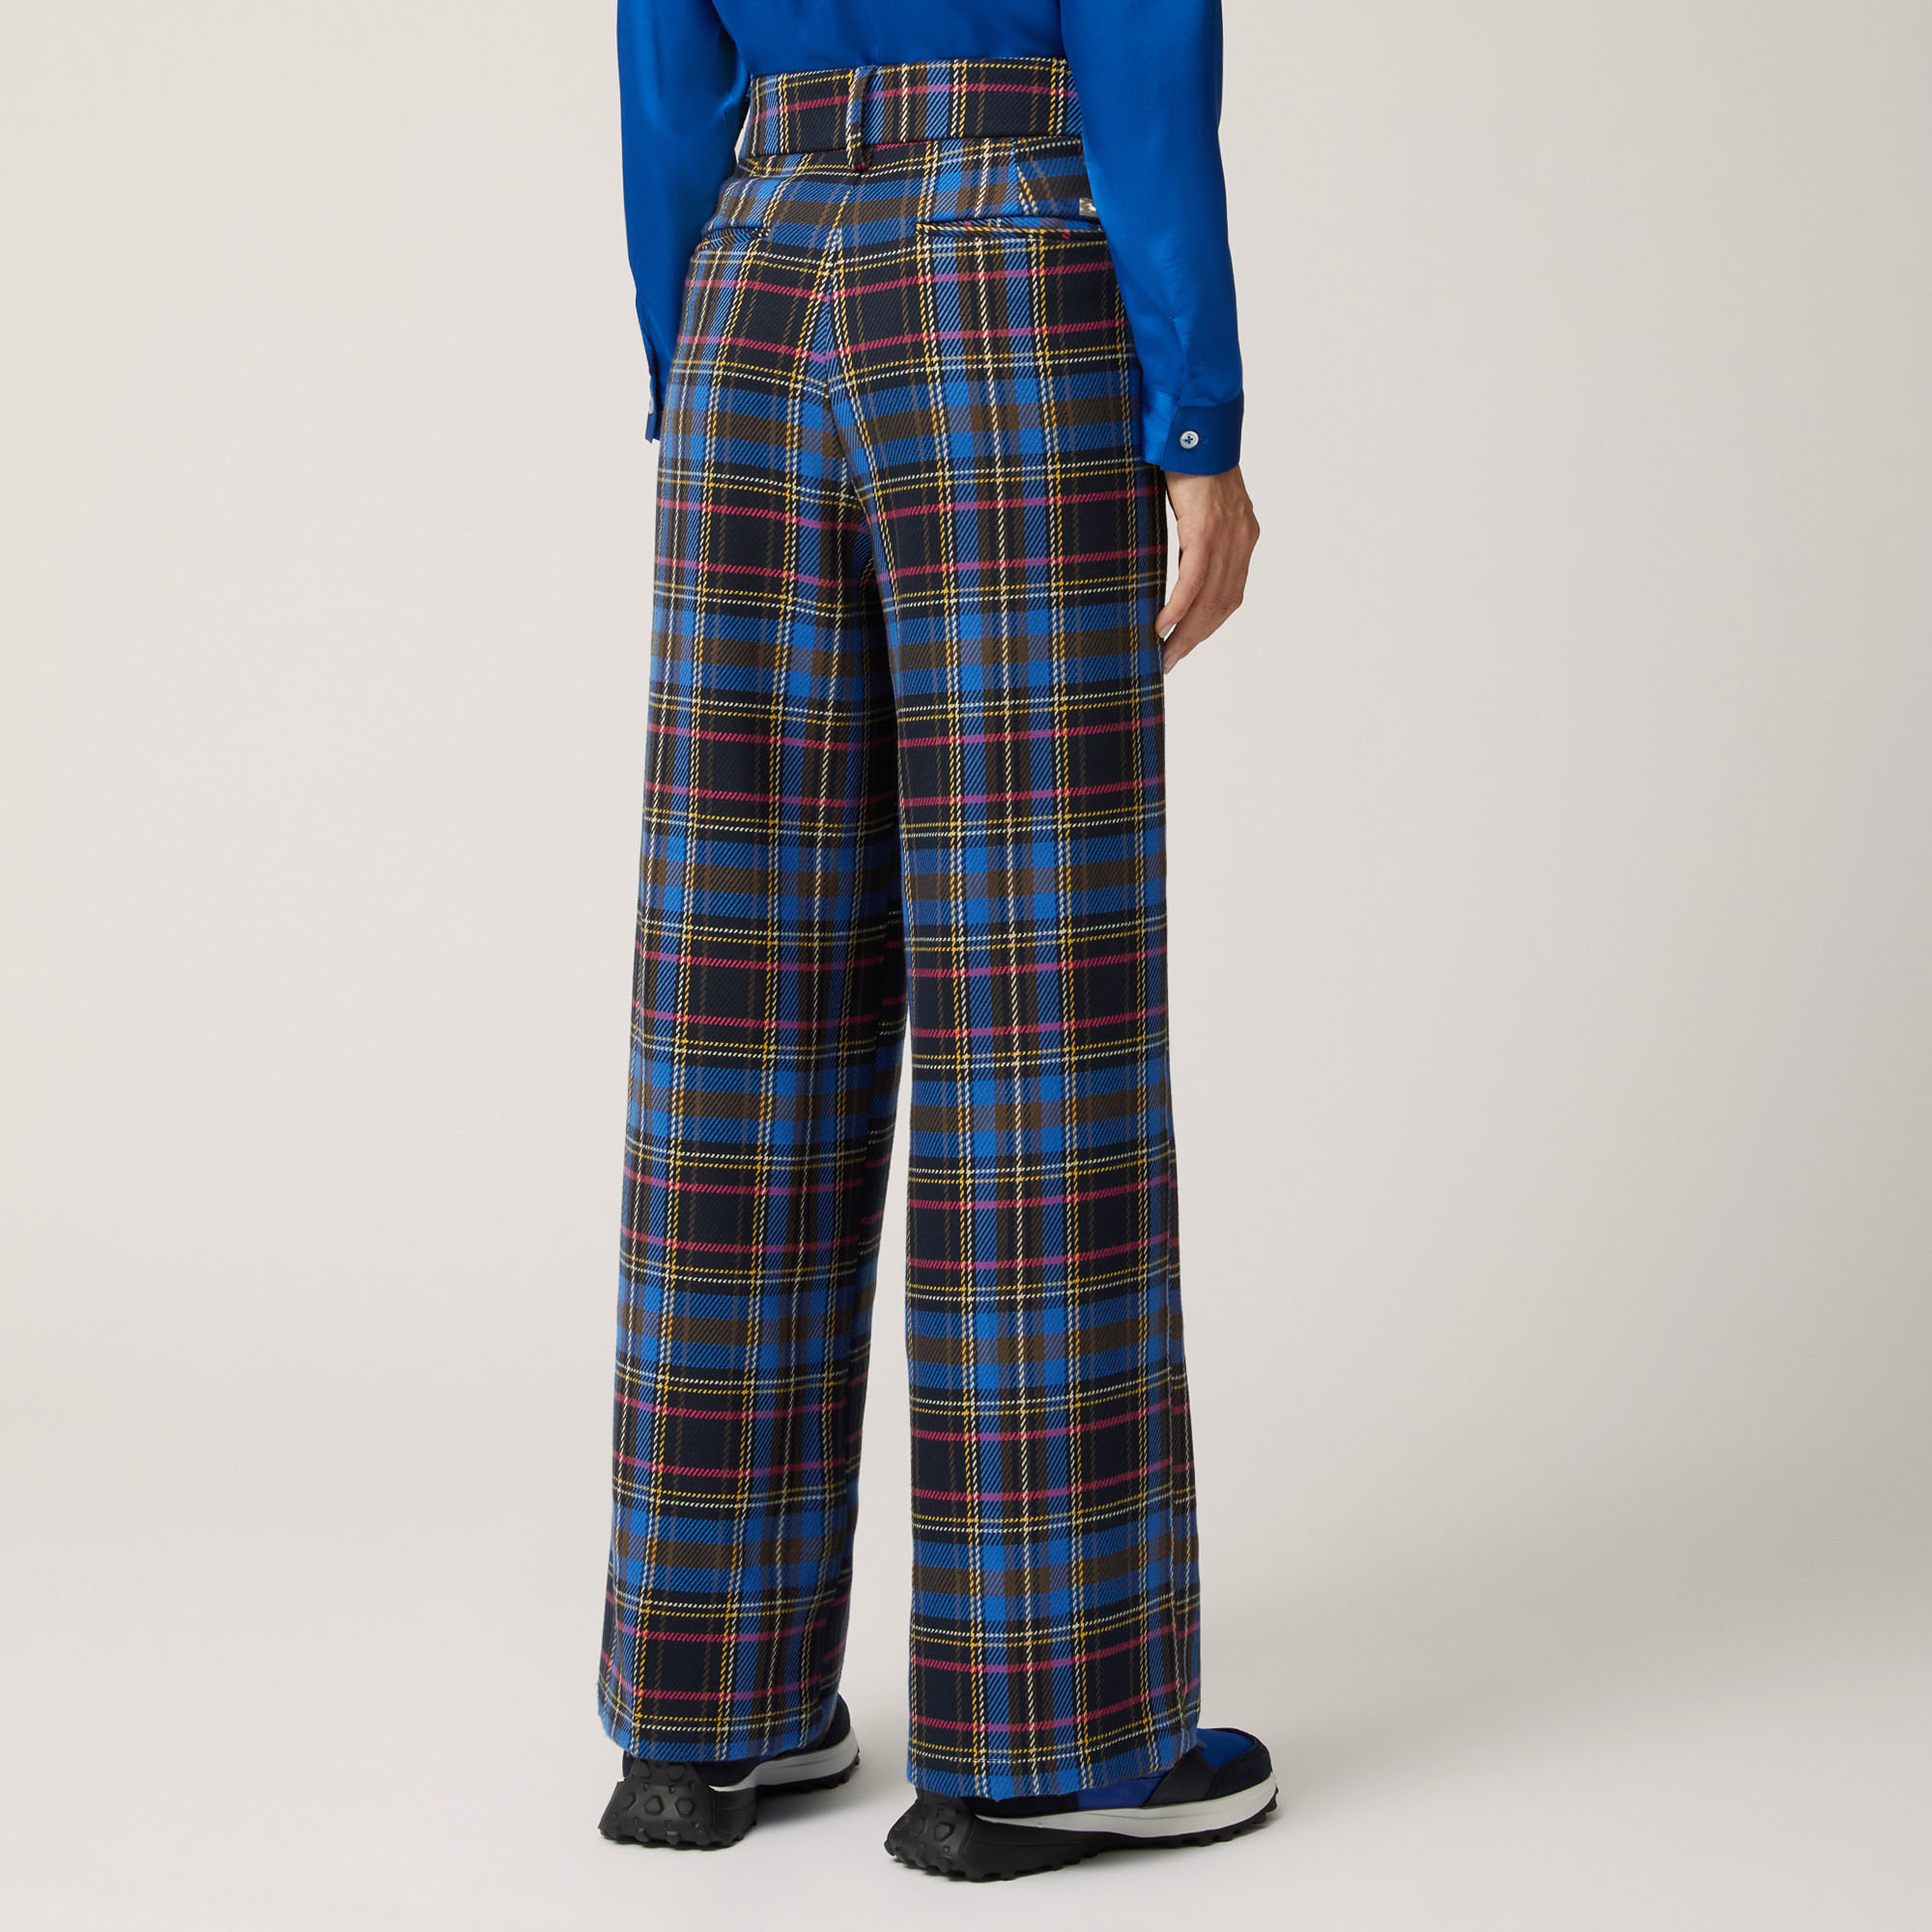 High-Waist Pants With Chequered Pattern, Blue, large